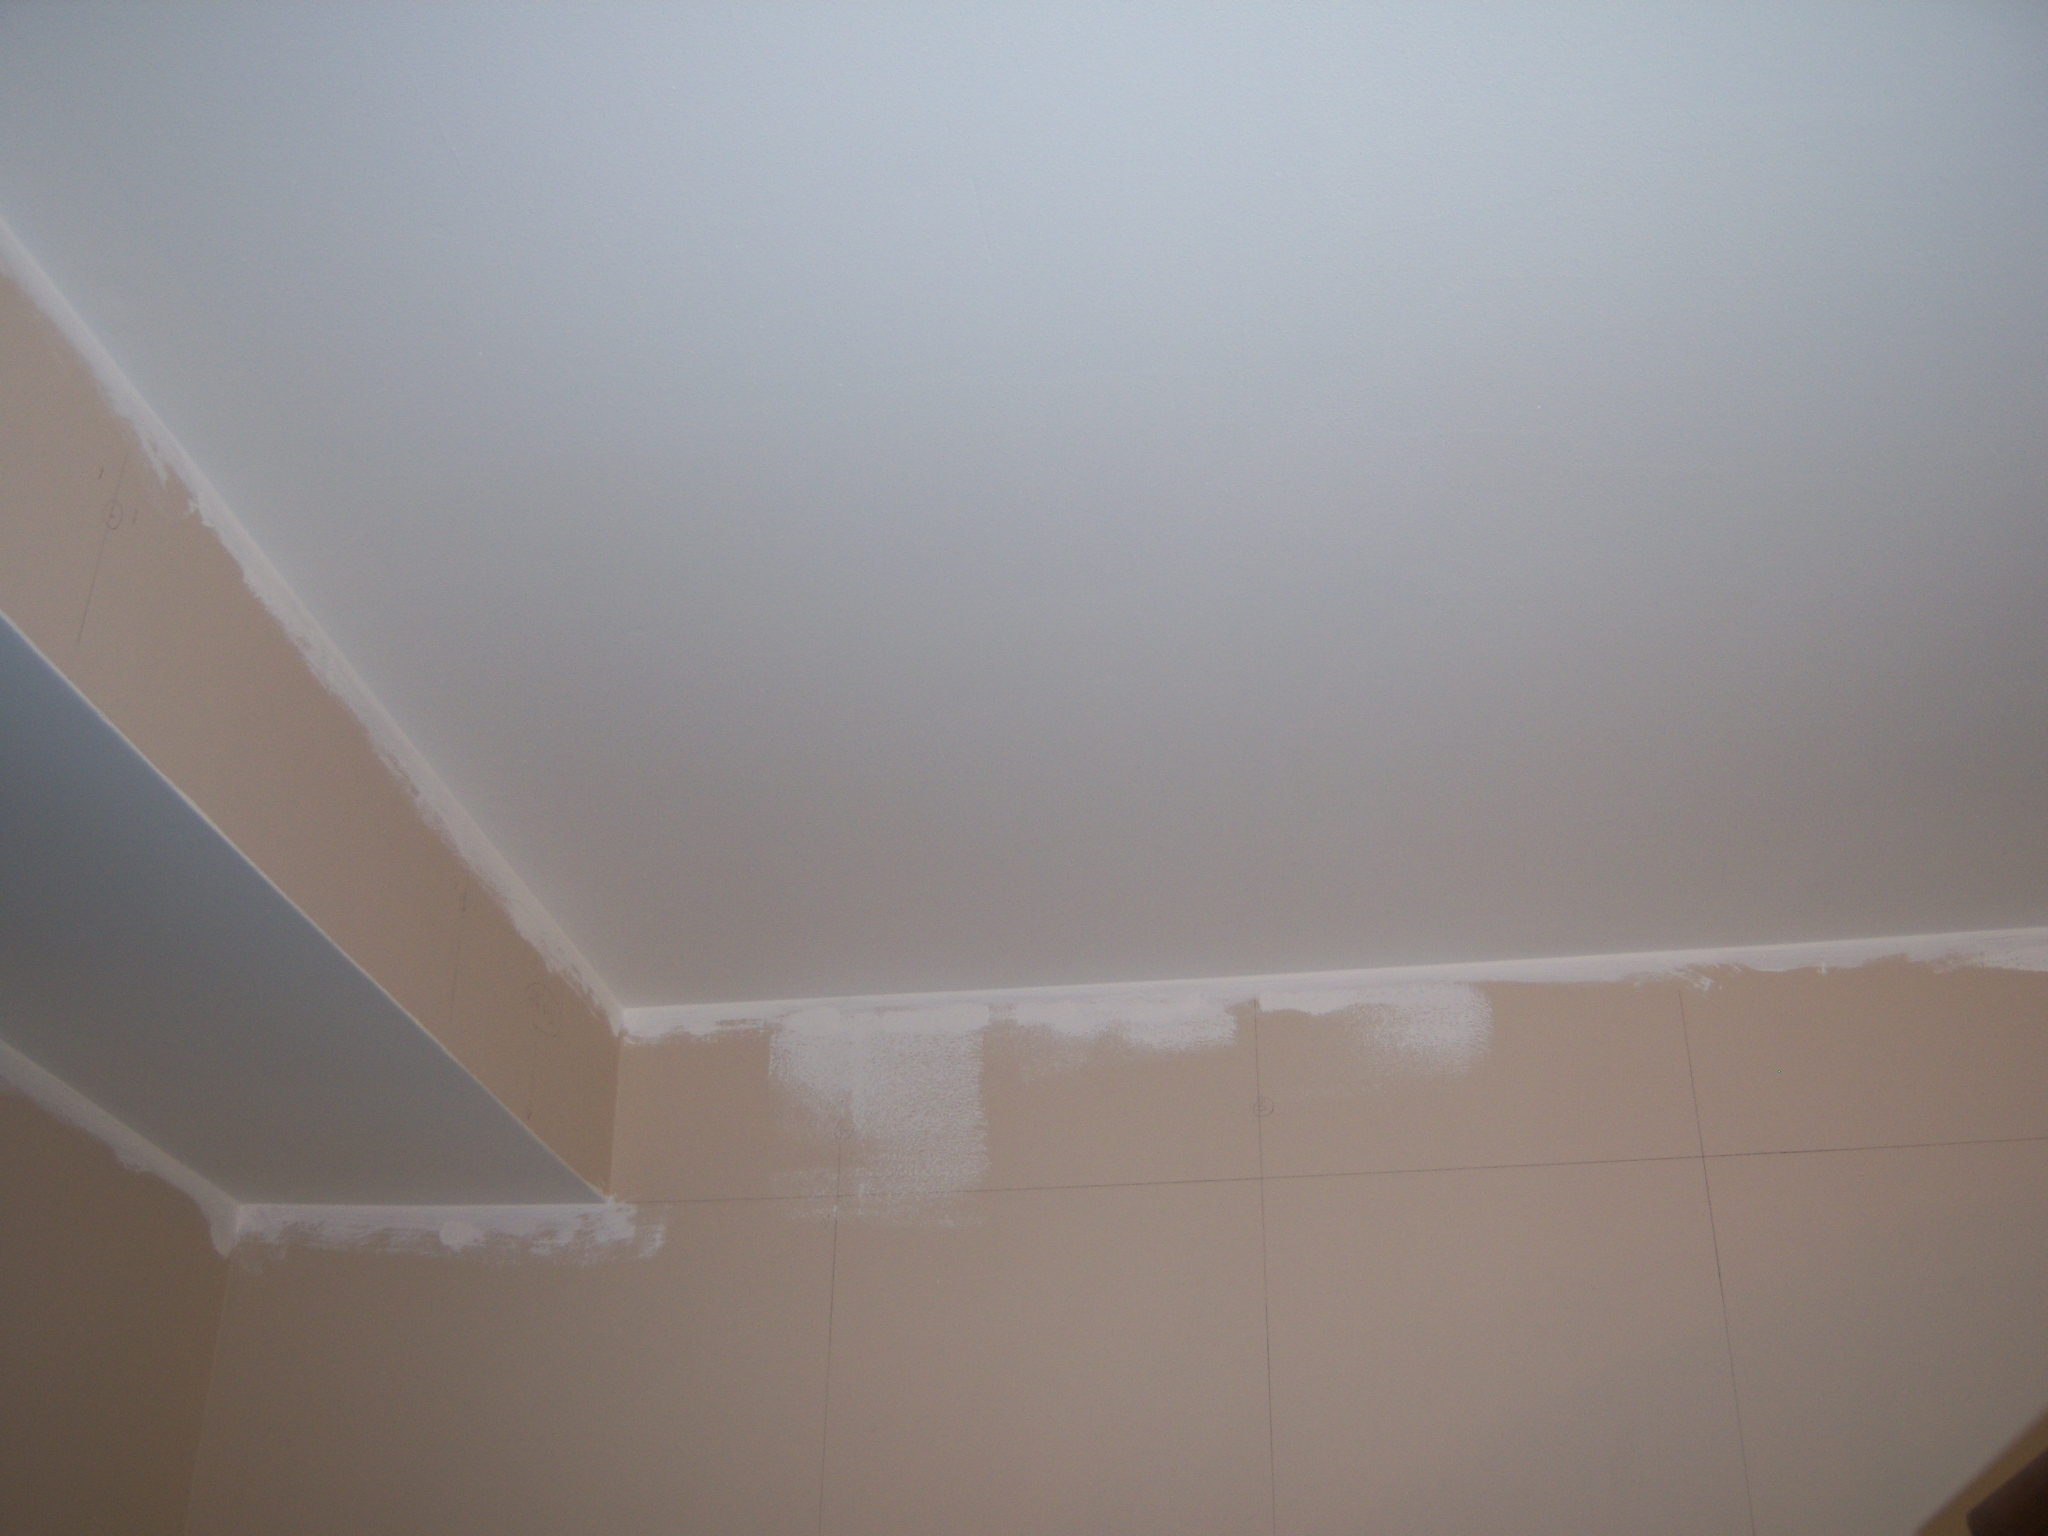 Patch Small Hole Ceiling